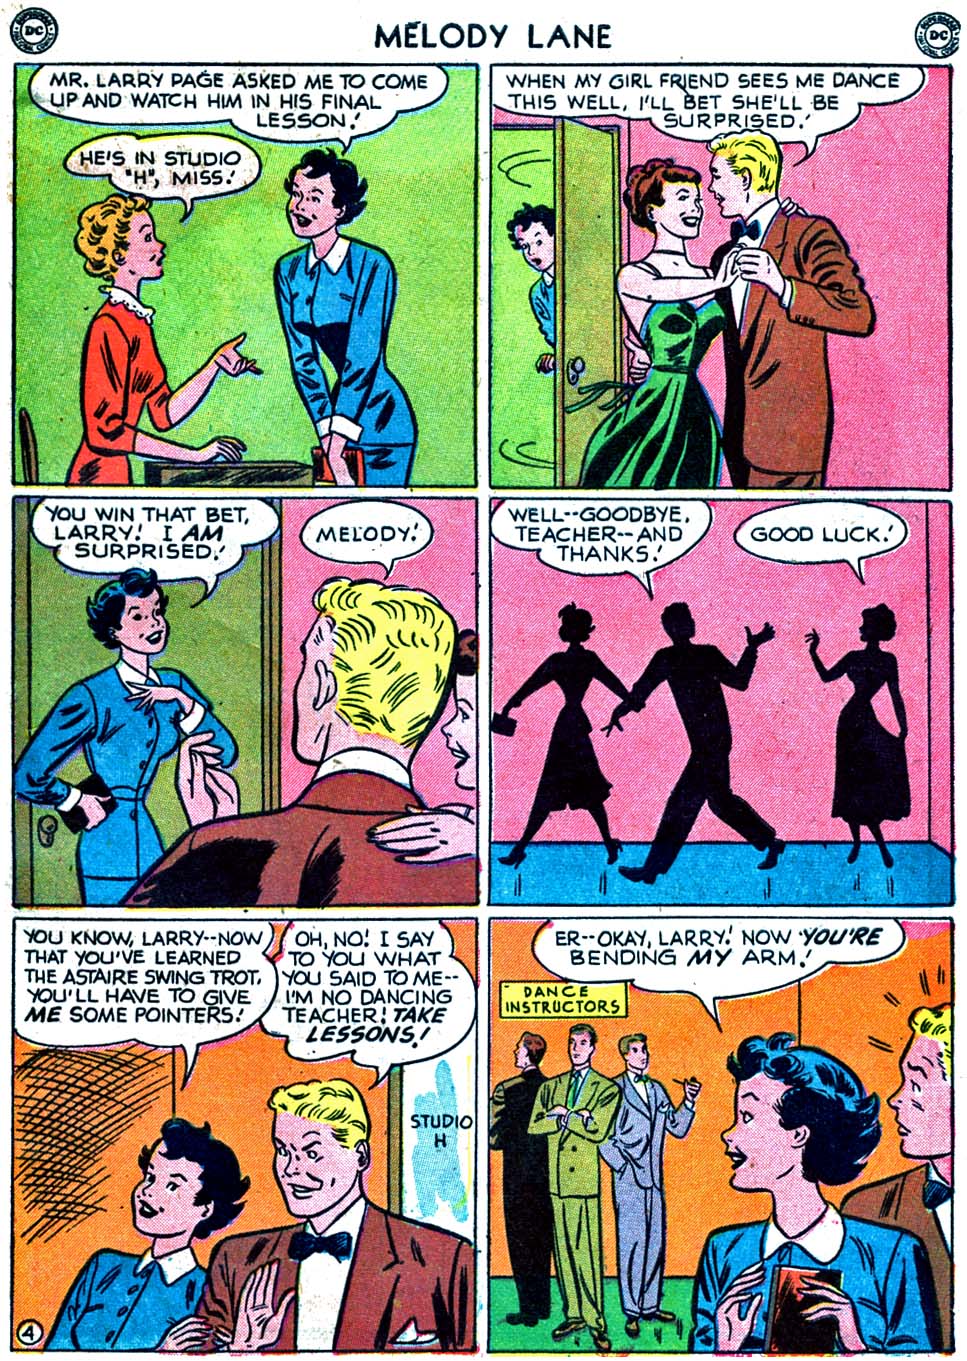 Read online Miss Melody Lane of Broadway comic -  Issue #2 - 45